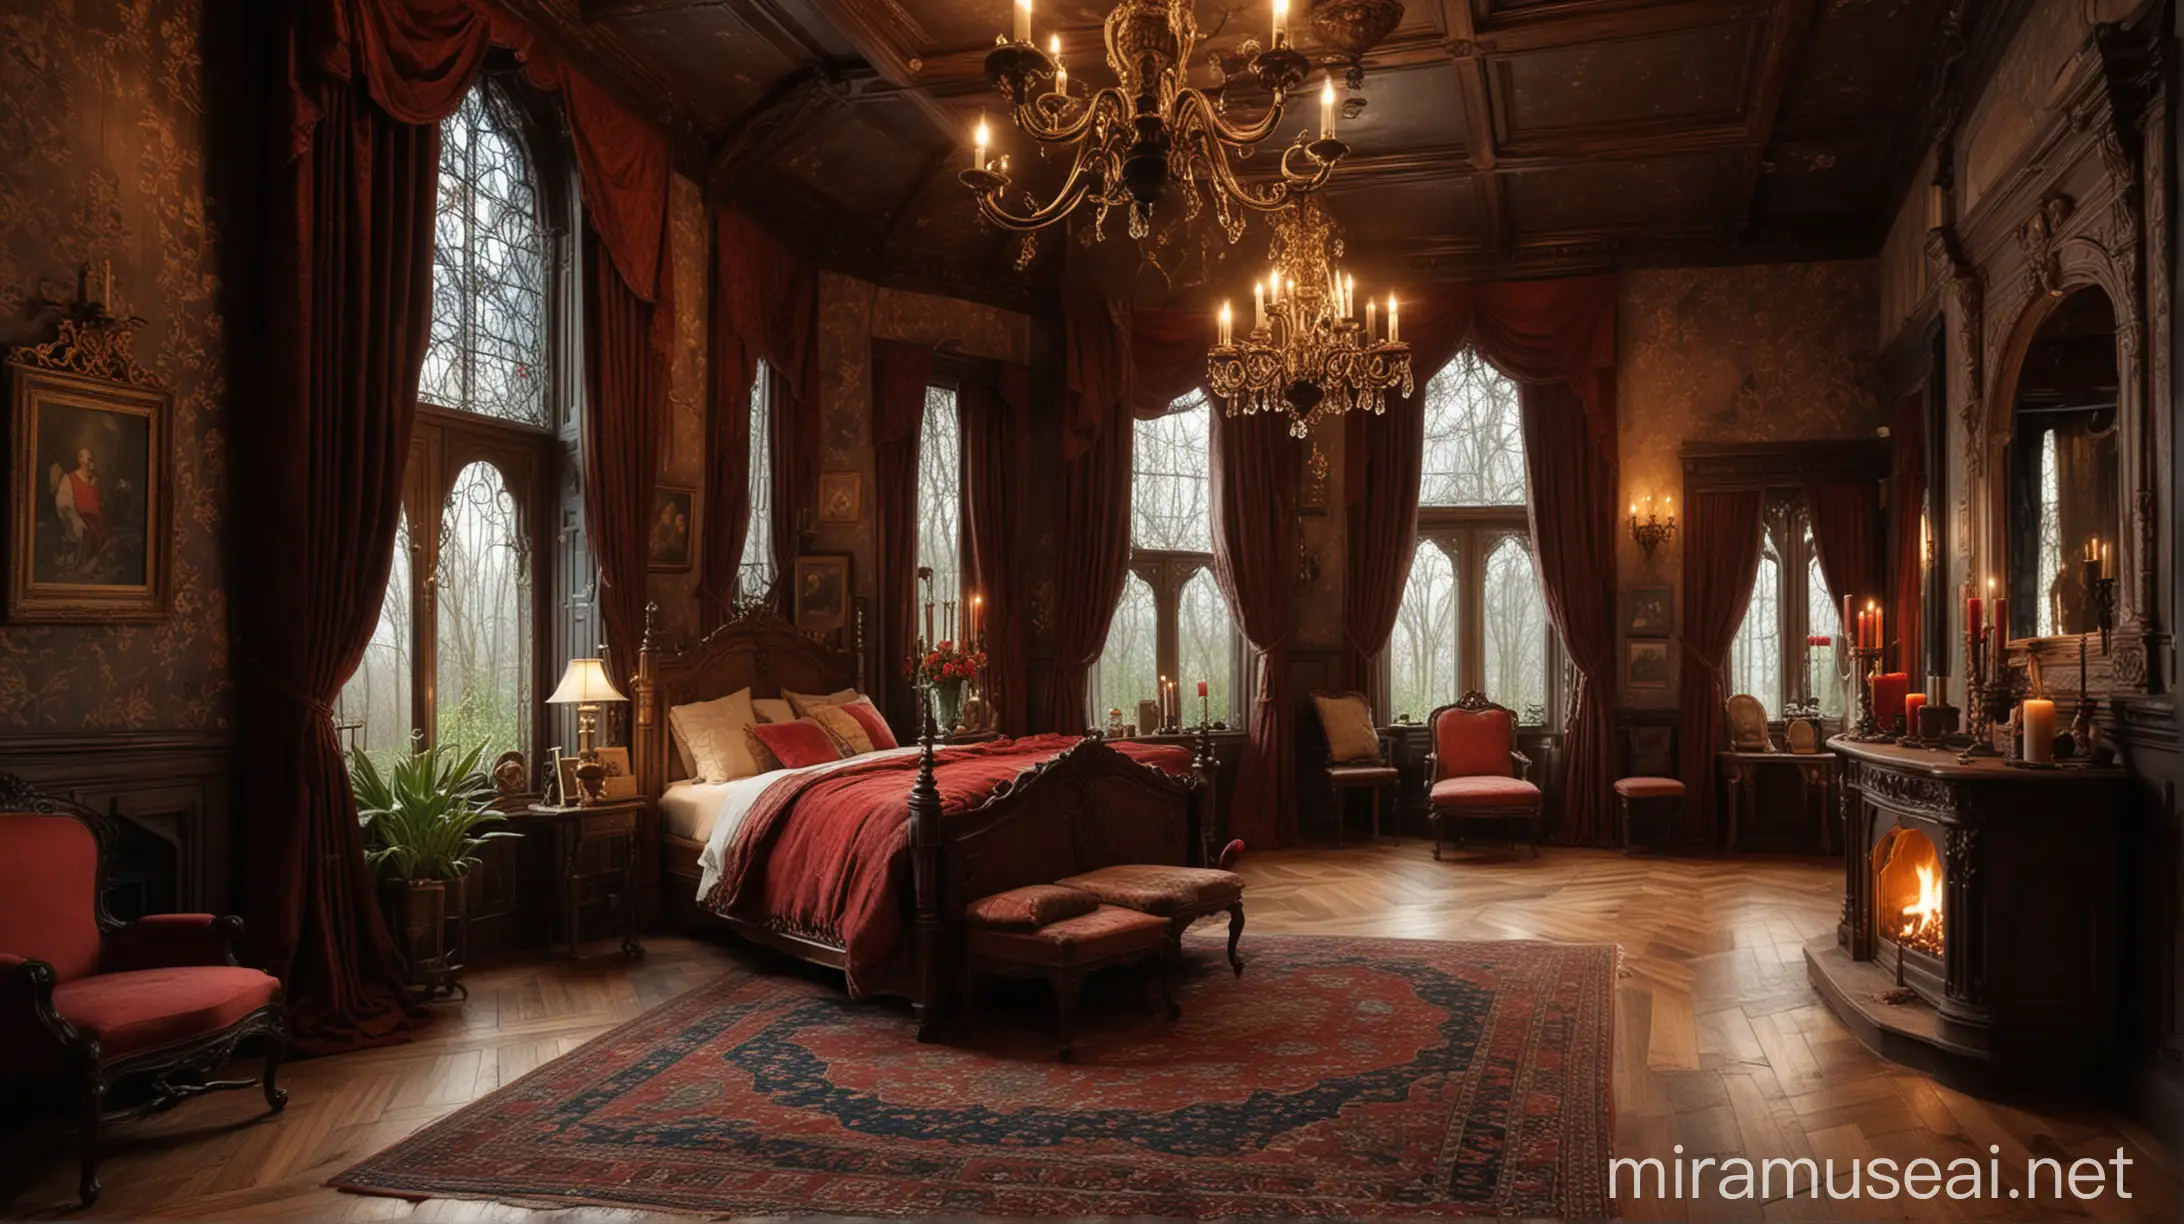 Luxurious Gothic Bedroom with Velvet Drapes and Fireplace